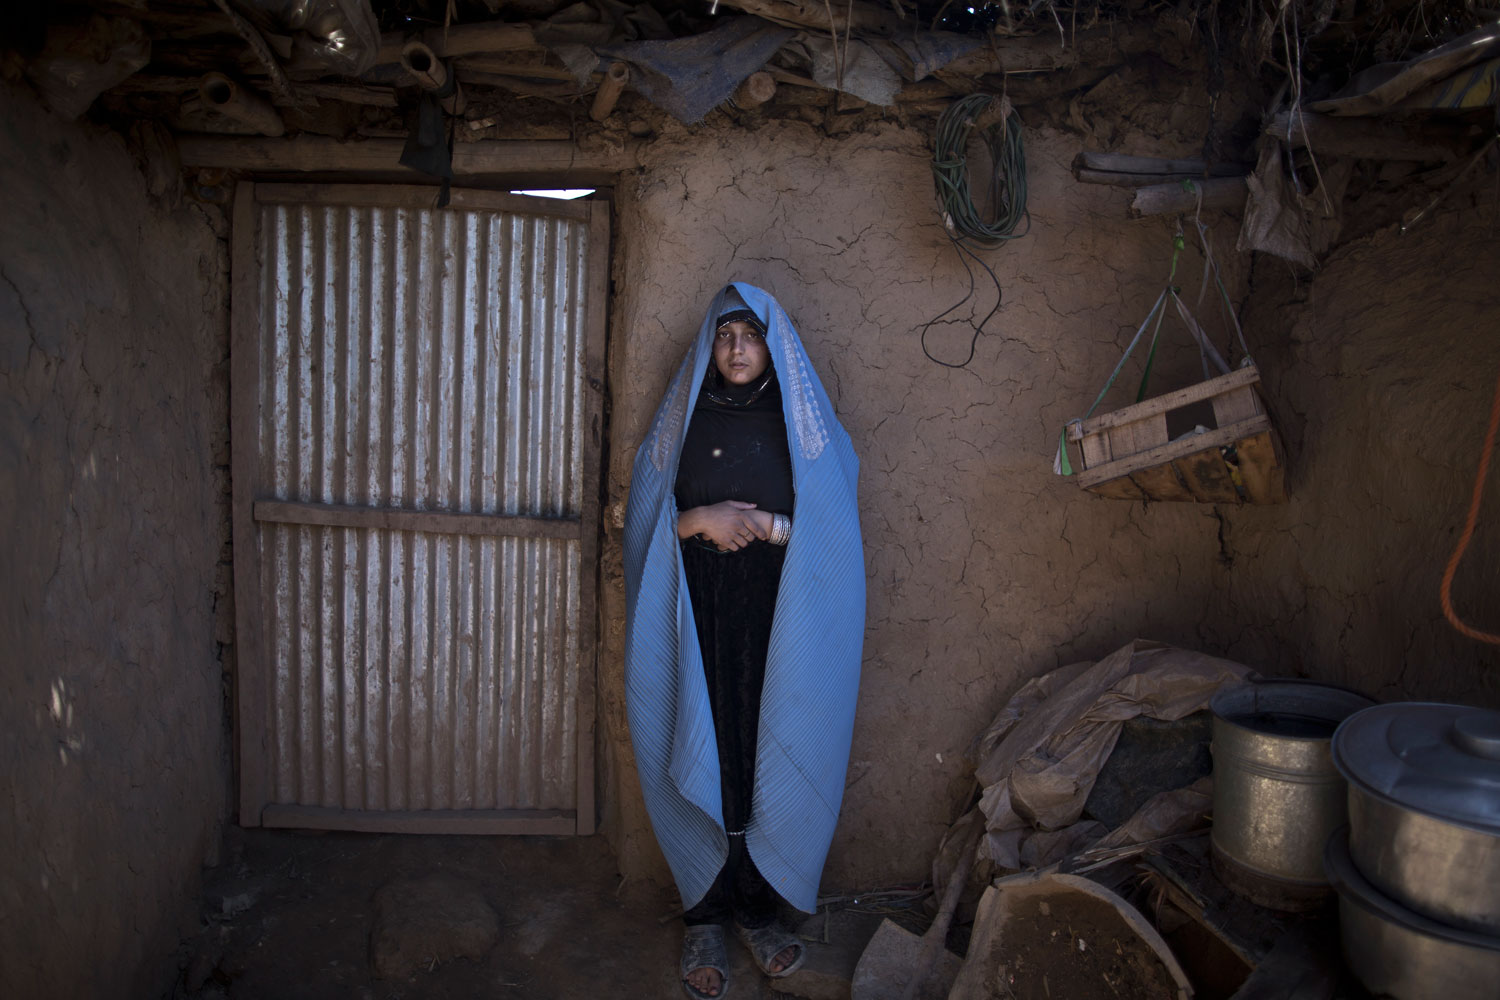 Afghan refugee Fareeda Abdulgafour, 20, a mother of one child, at her mud house in a slum on the outskirts of Islamabad on March 30, 2014. Nine years ago Abdulgafour and her parents fled the violence in Jalalabad.
                              
                               I am a widow. My husband died in a car accident. My boy is my life, and I will live this life taking care of my son.